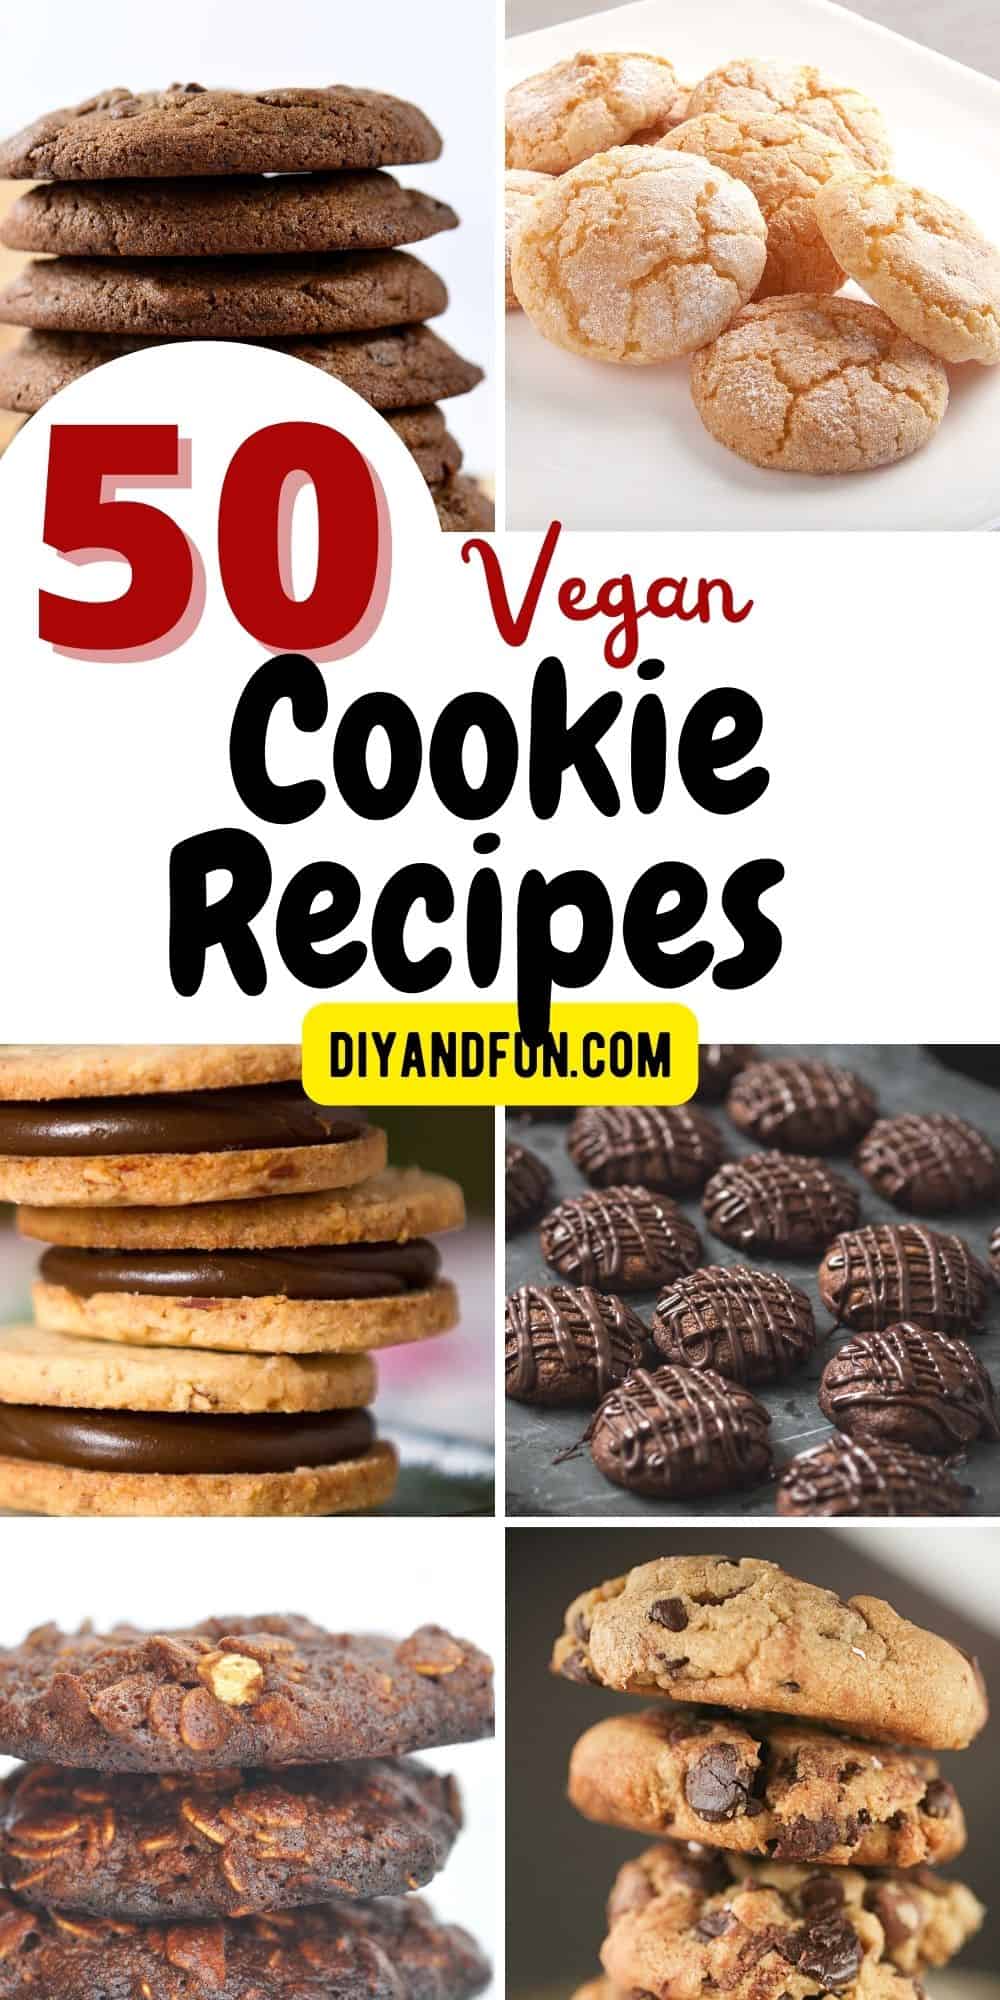 50 Delicious Vegan Cookie Recipes that are all delicious to eat! Includes gluten free, paleo, sugar free, keto, vegan recipes